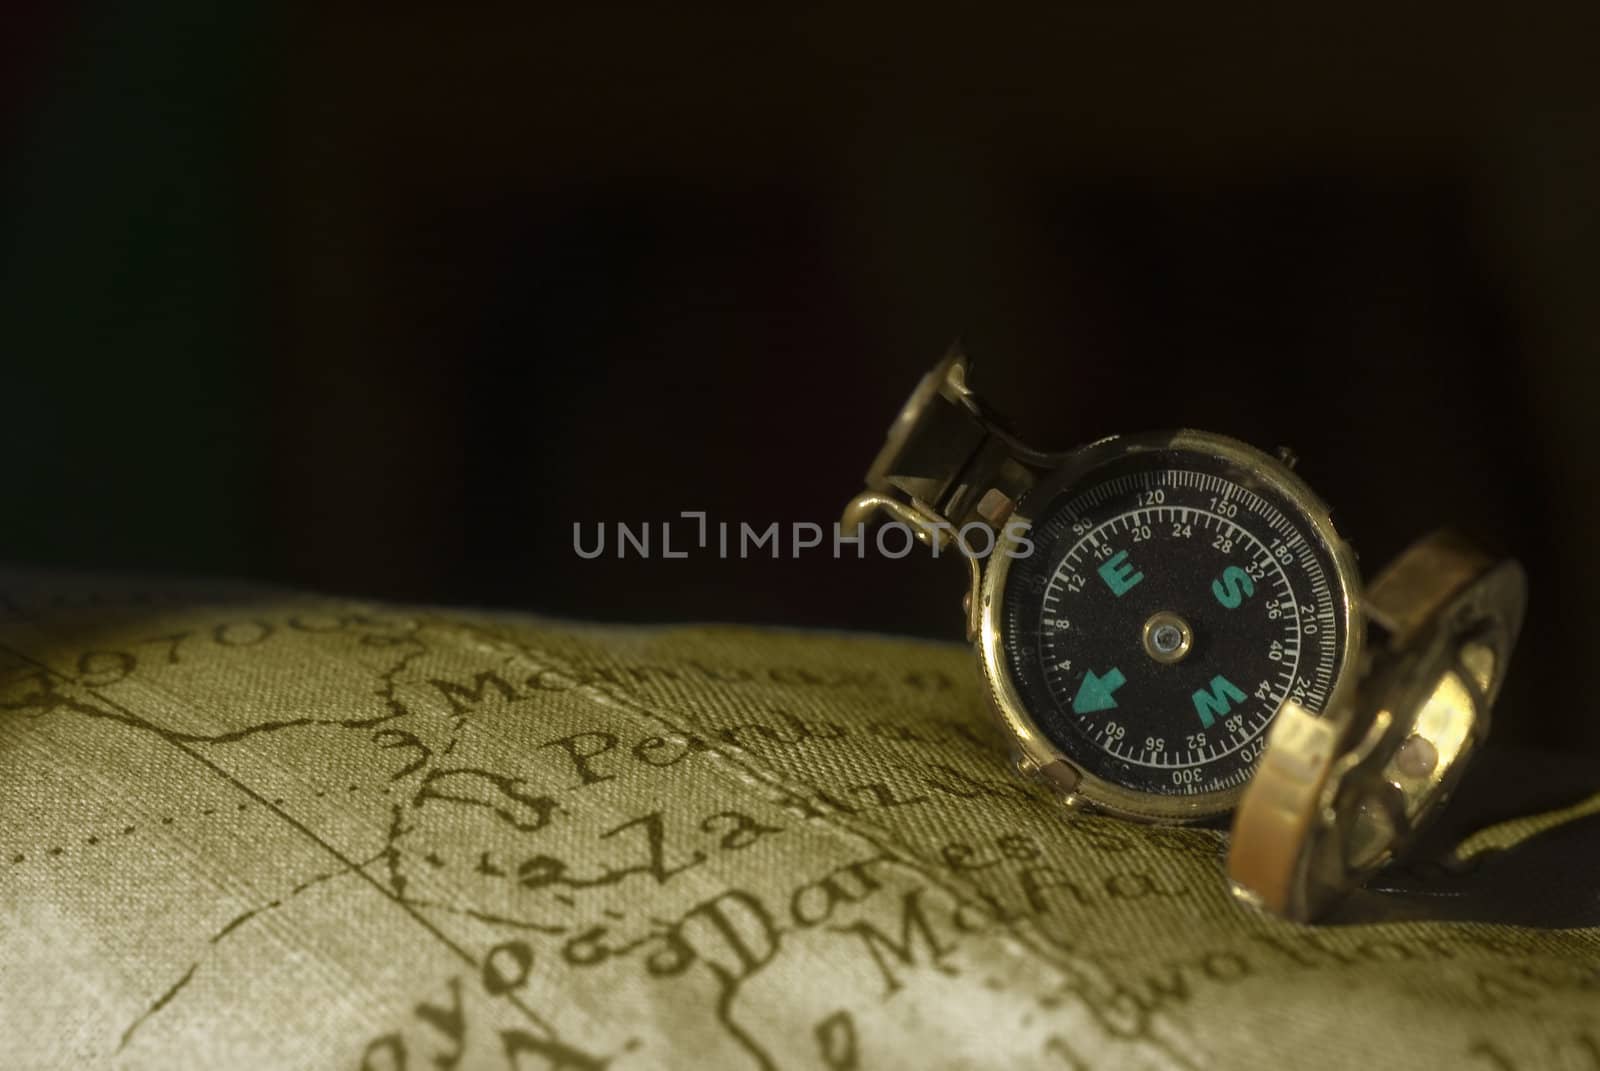 Old compass on an old map and space for text 